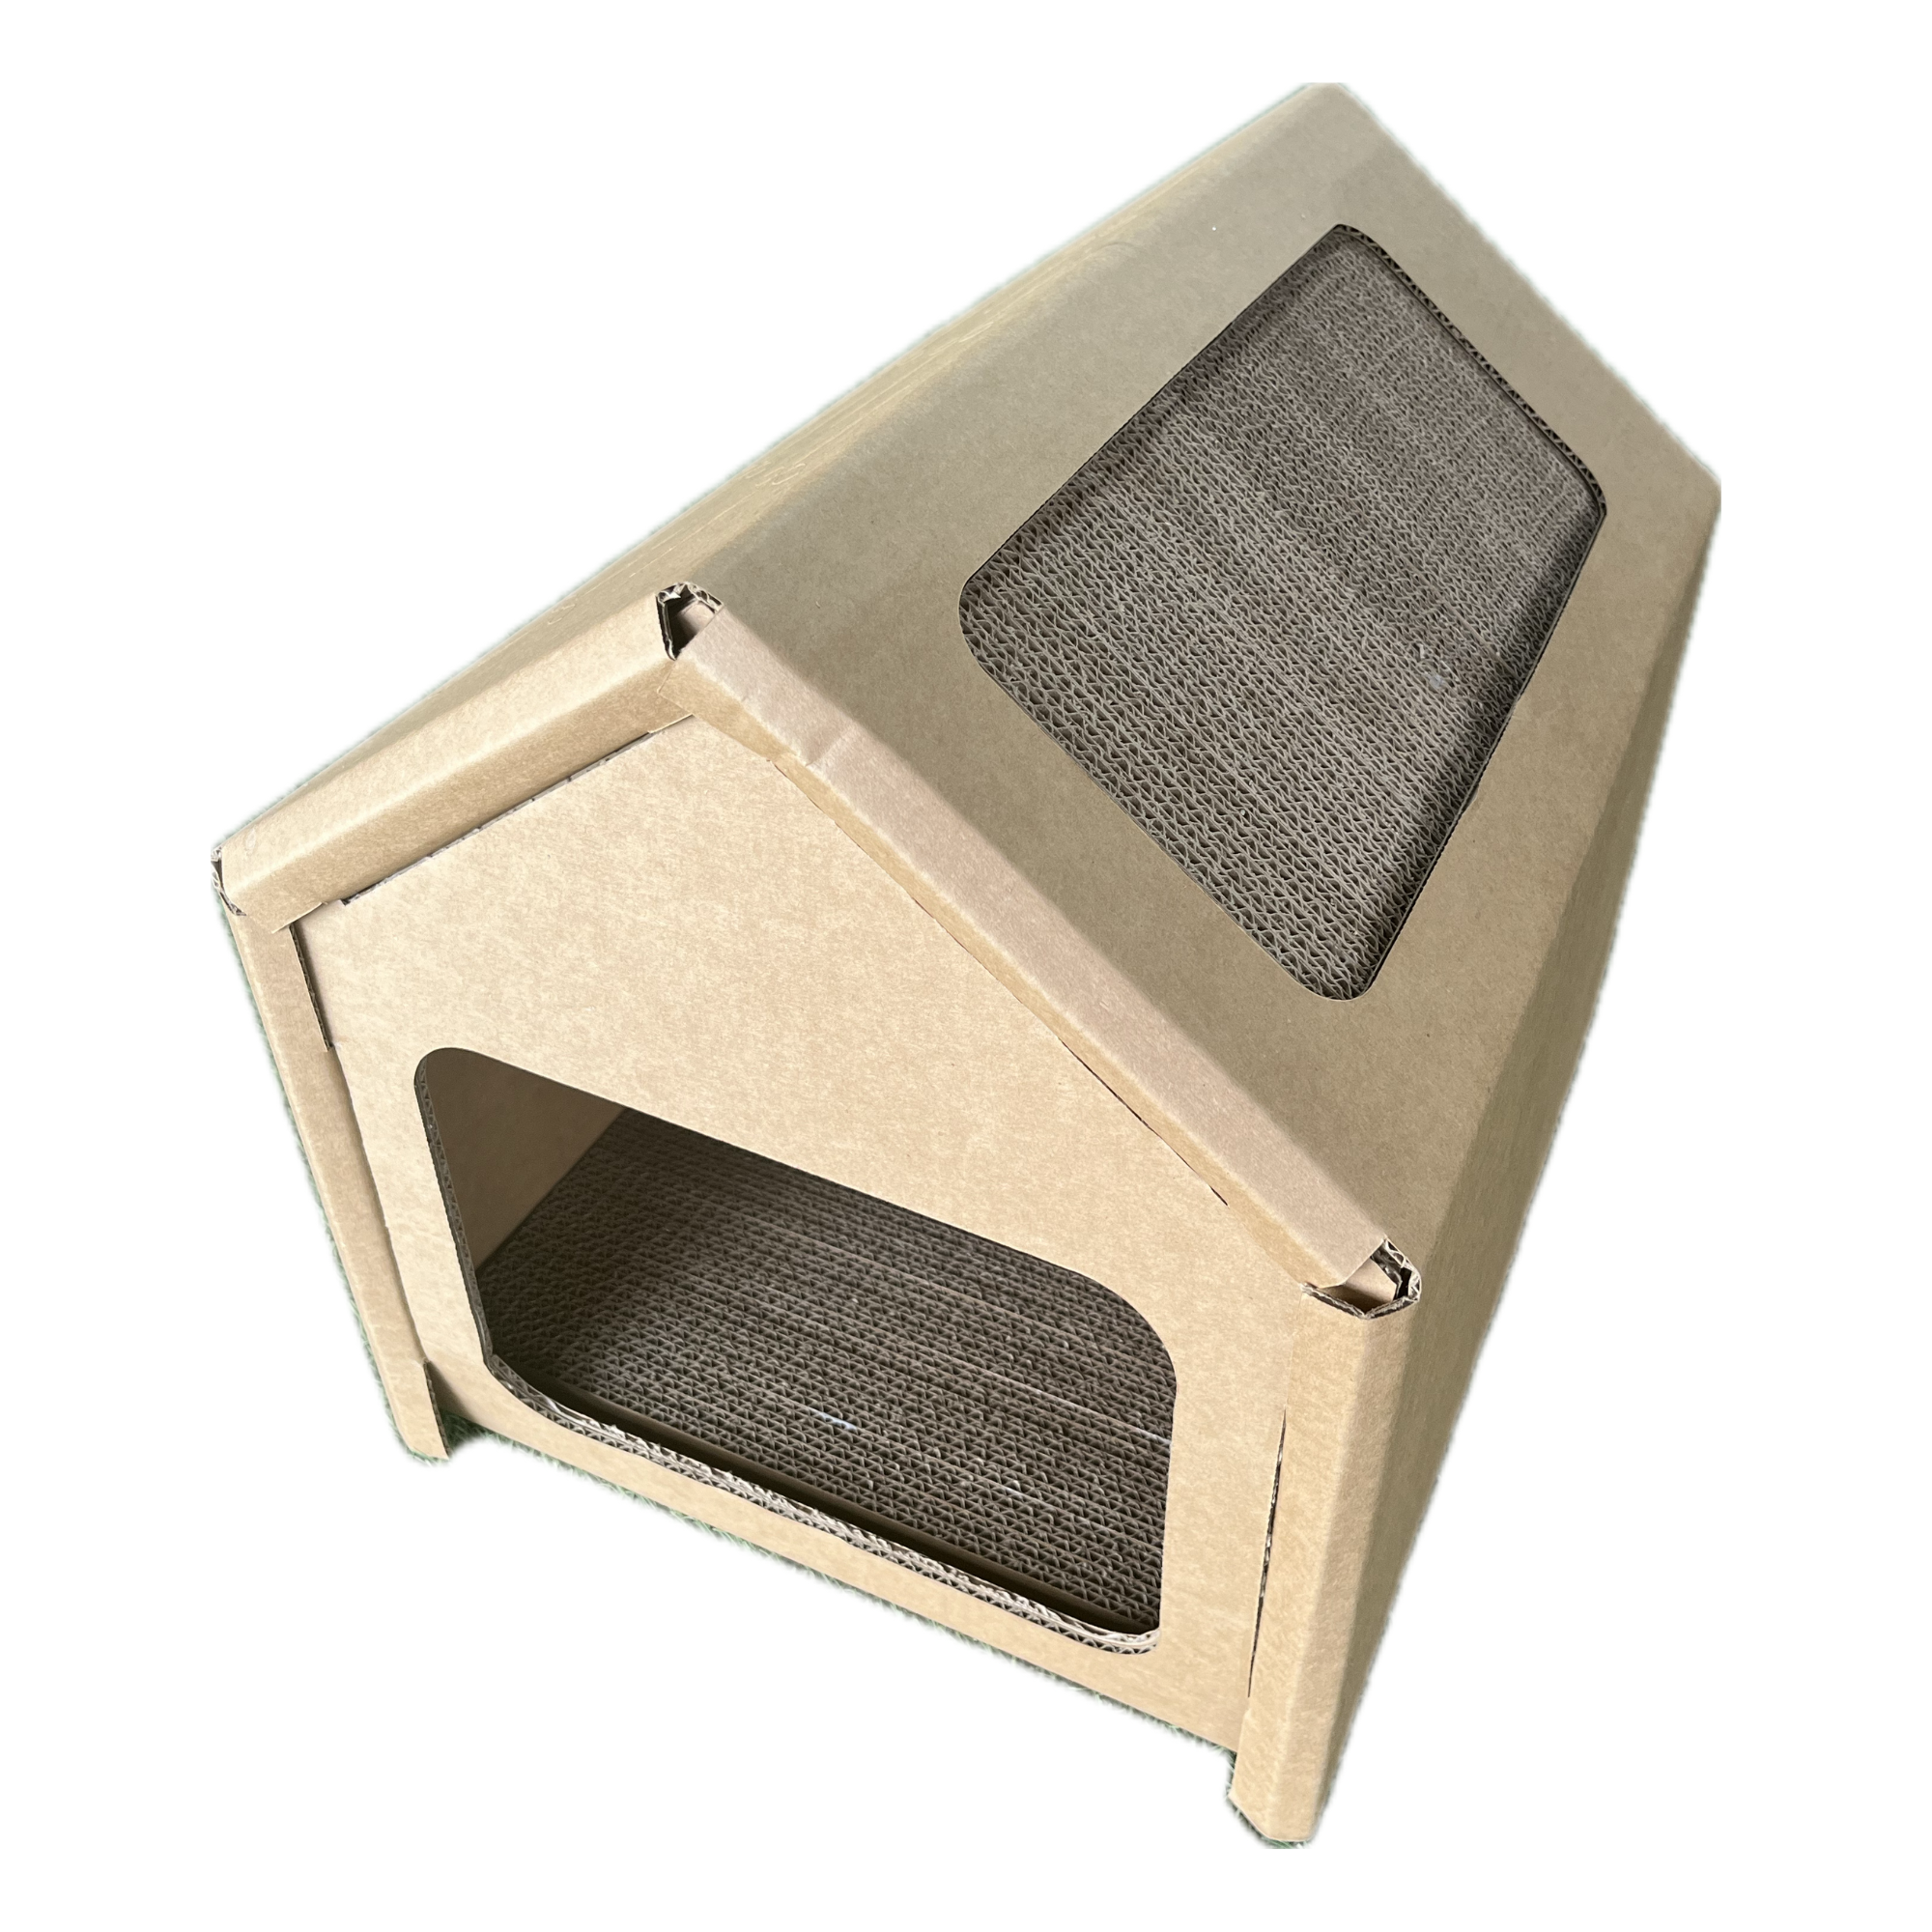 PetPro Deluxe Corrugated Cardboard Cat House - Sturdy and Eco-Friendly, Perfect Indoor Hideaway with Built-in Scratching Pads